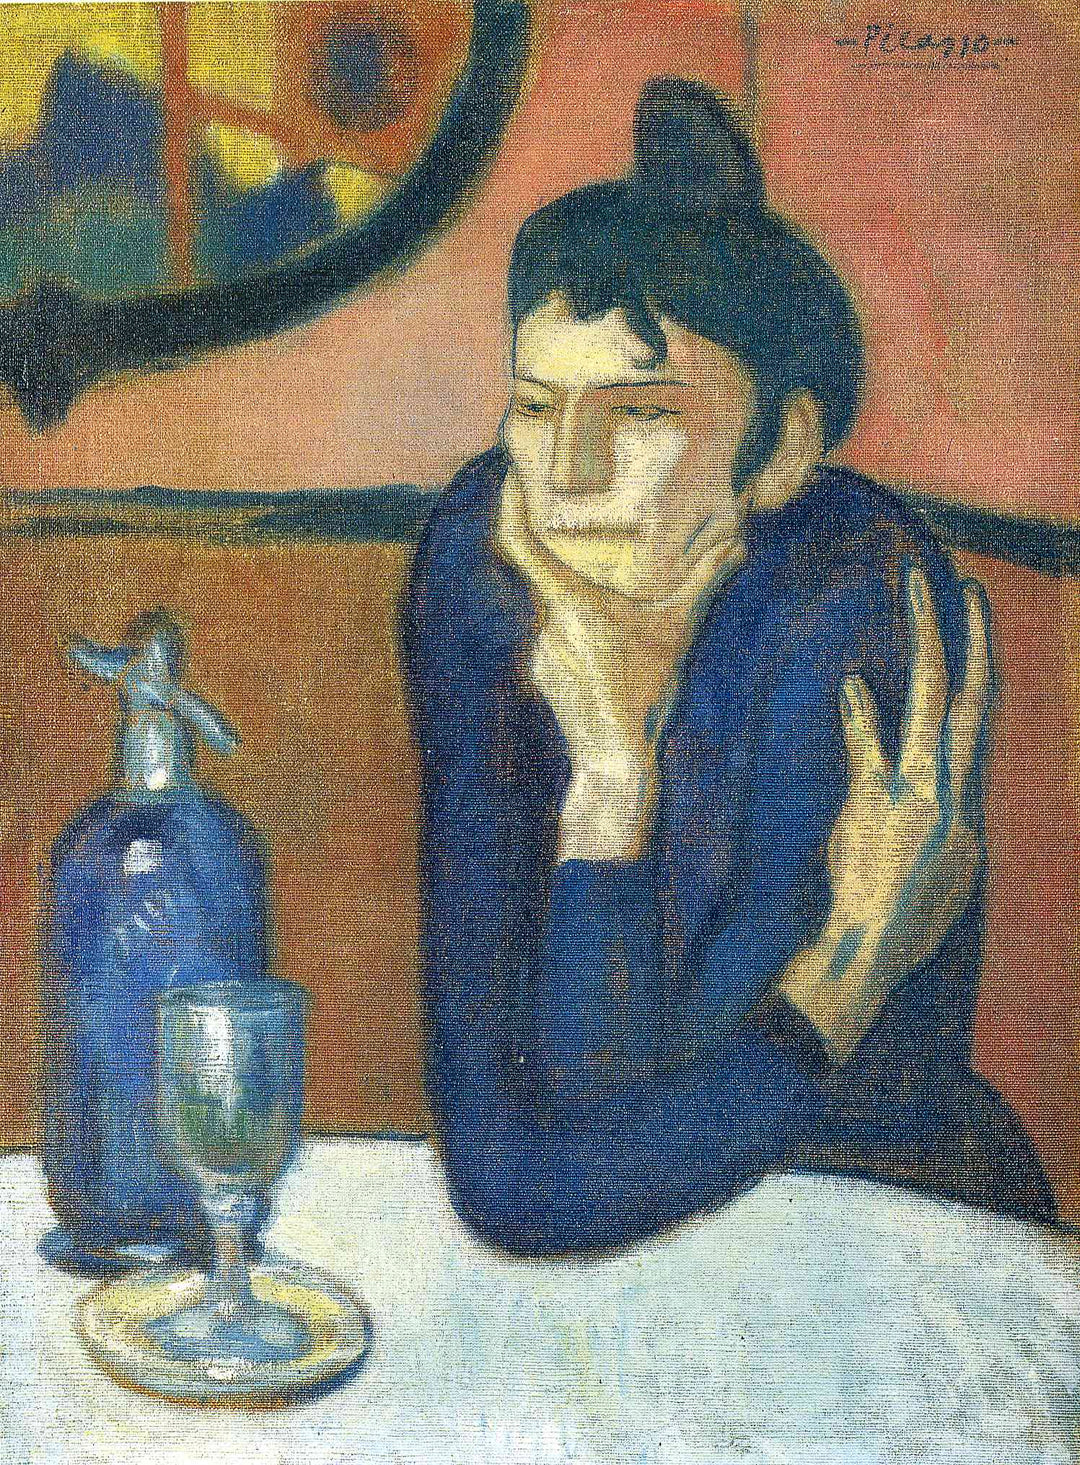 The Absinthe Drinker by Pablo Picasso. Picasso artworks, Picasso wall art, Picasso canvas art, Picasso reproduction for sale, Picasso oil painting on canvas, Blue Surf Art